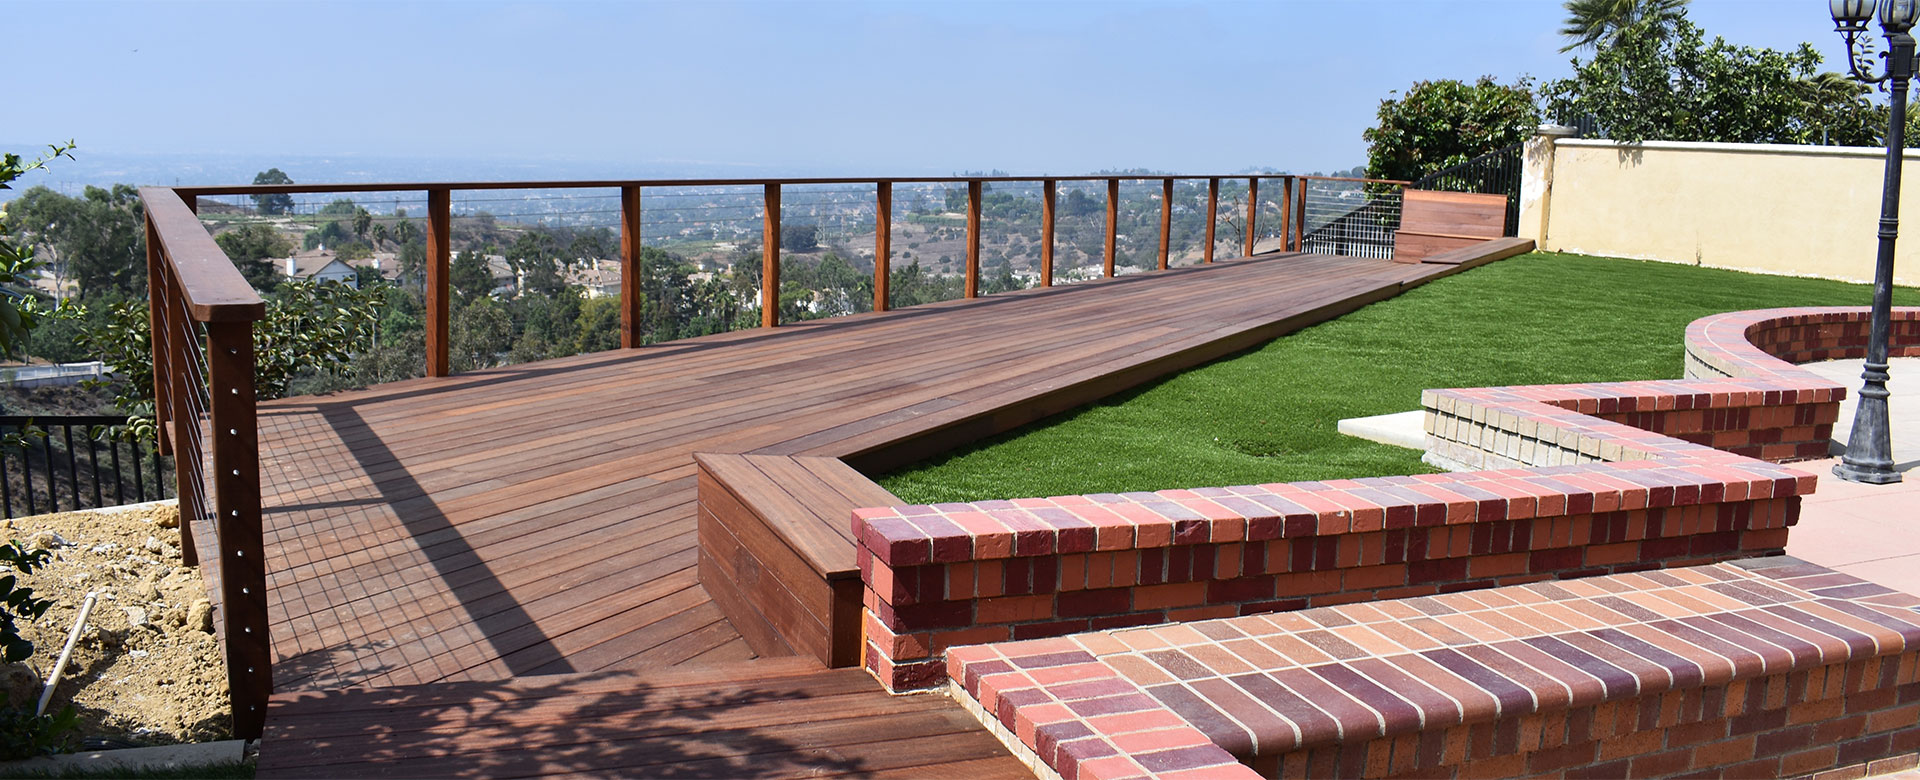 wooden deck with grass and brick overlooking a sunny city